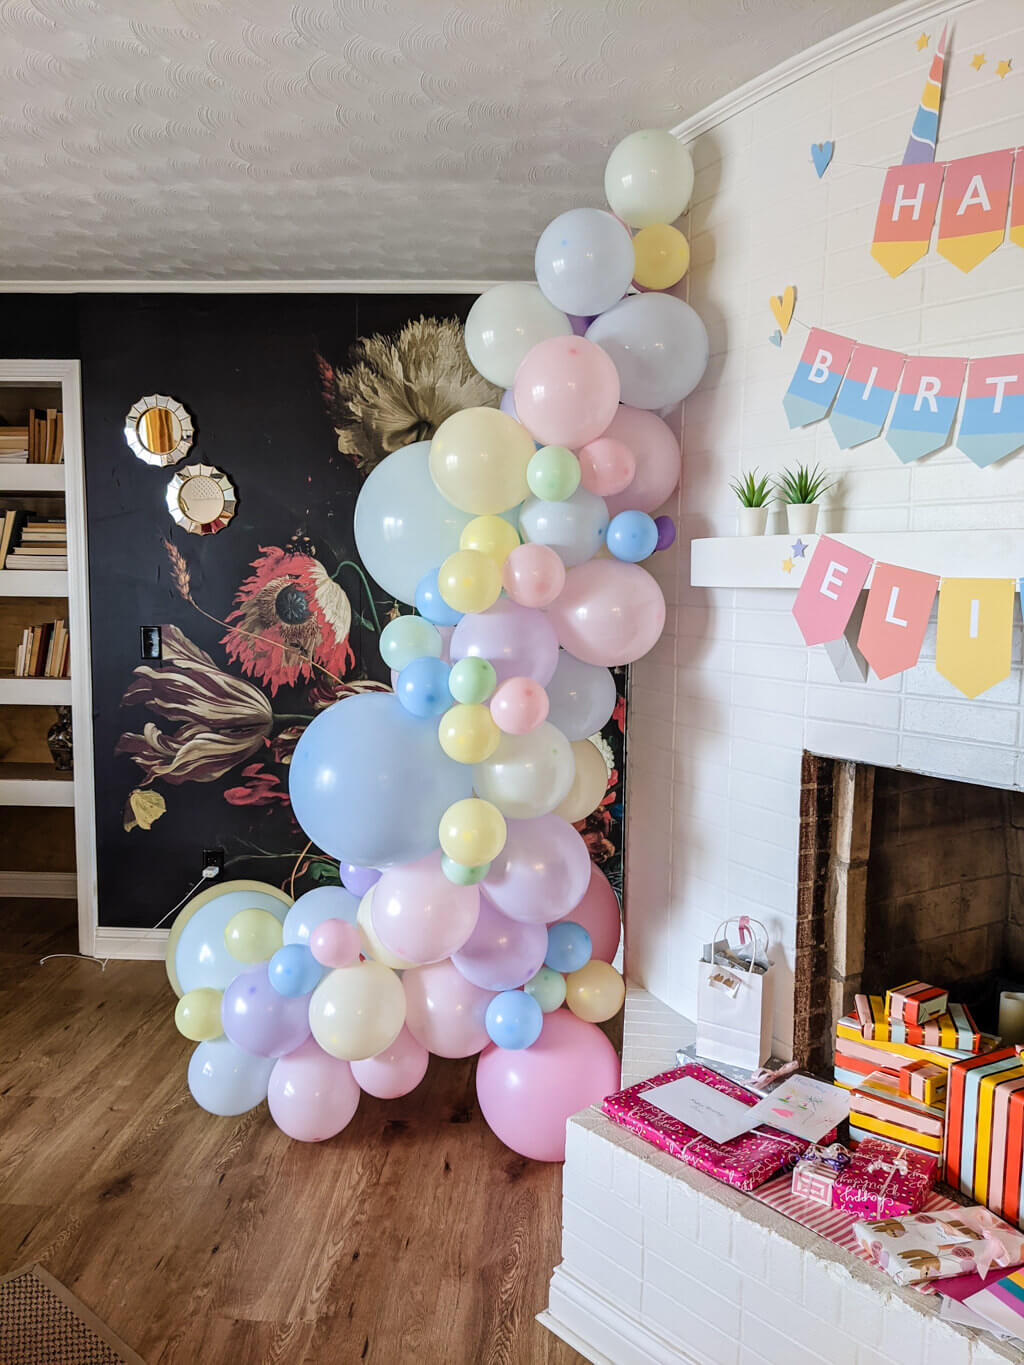 How to Make A Balloon Garland - Easy Tutorial for Beginners